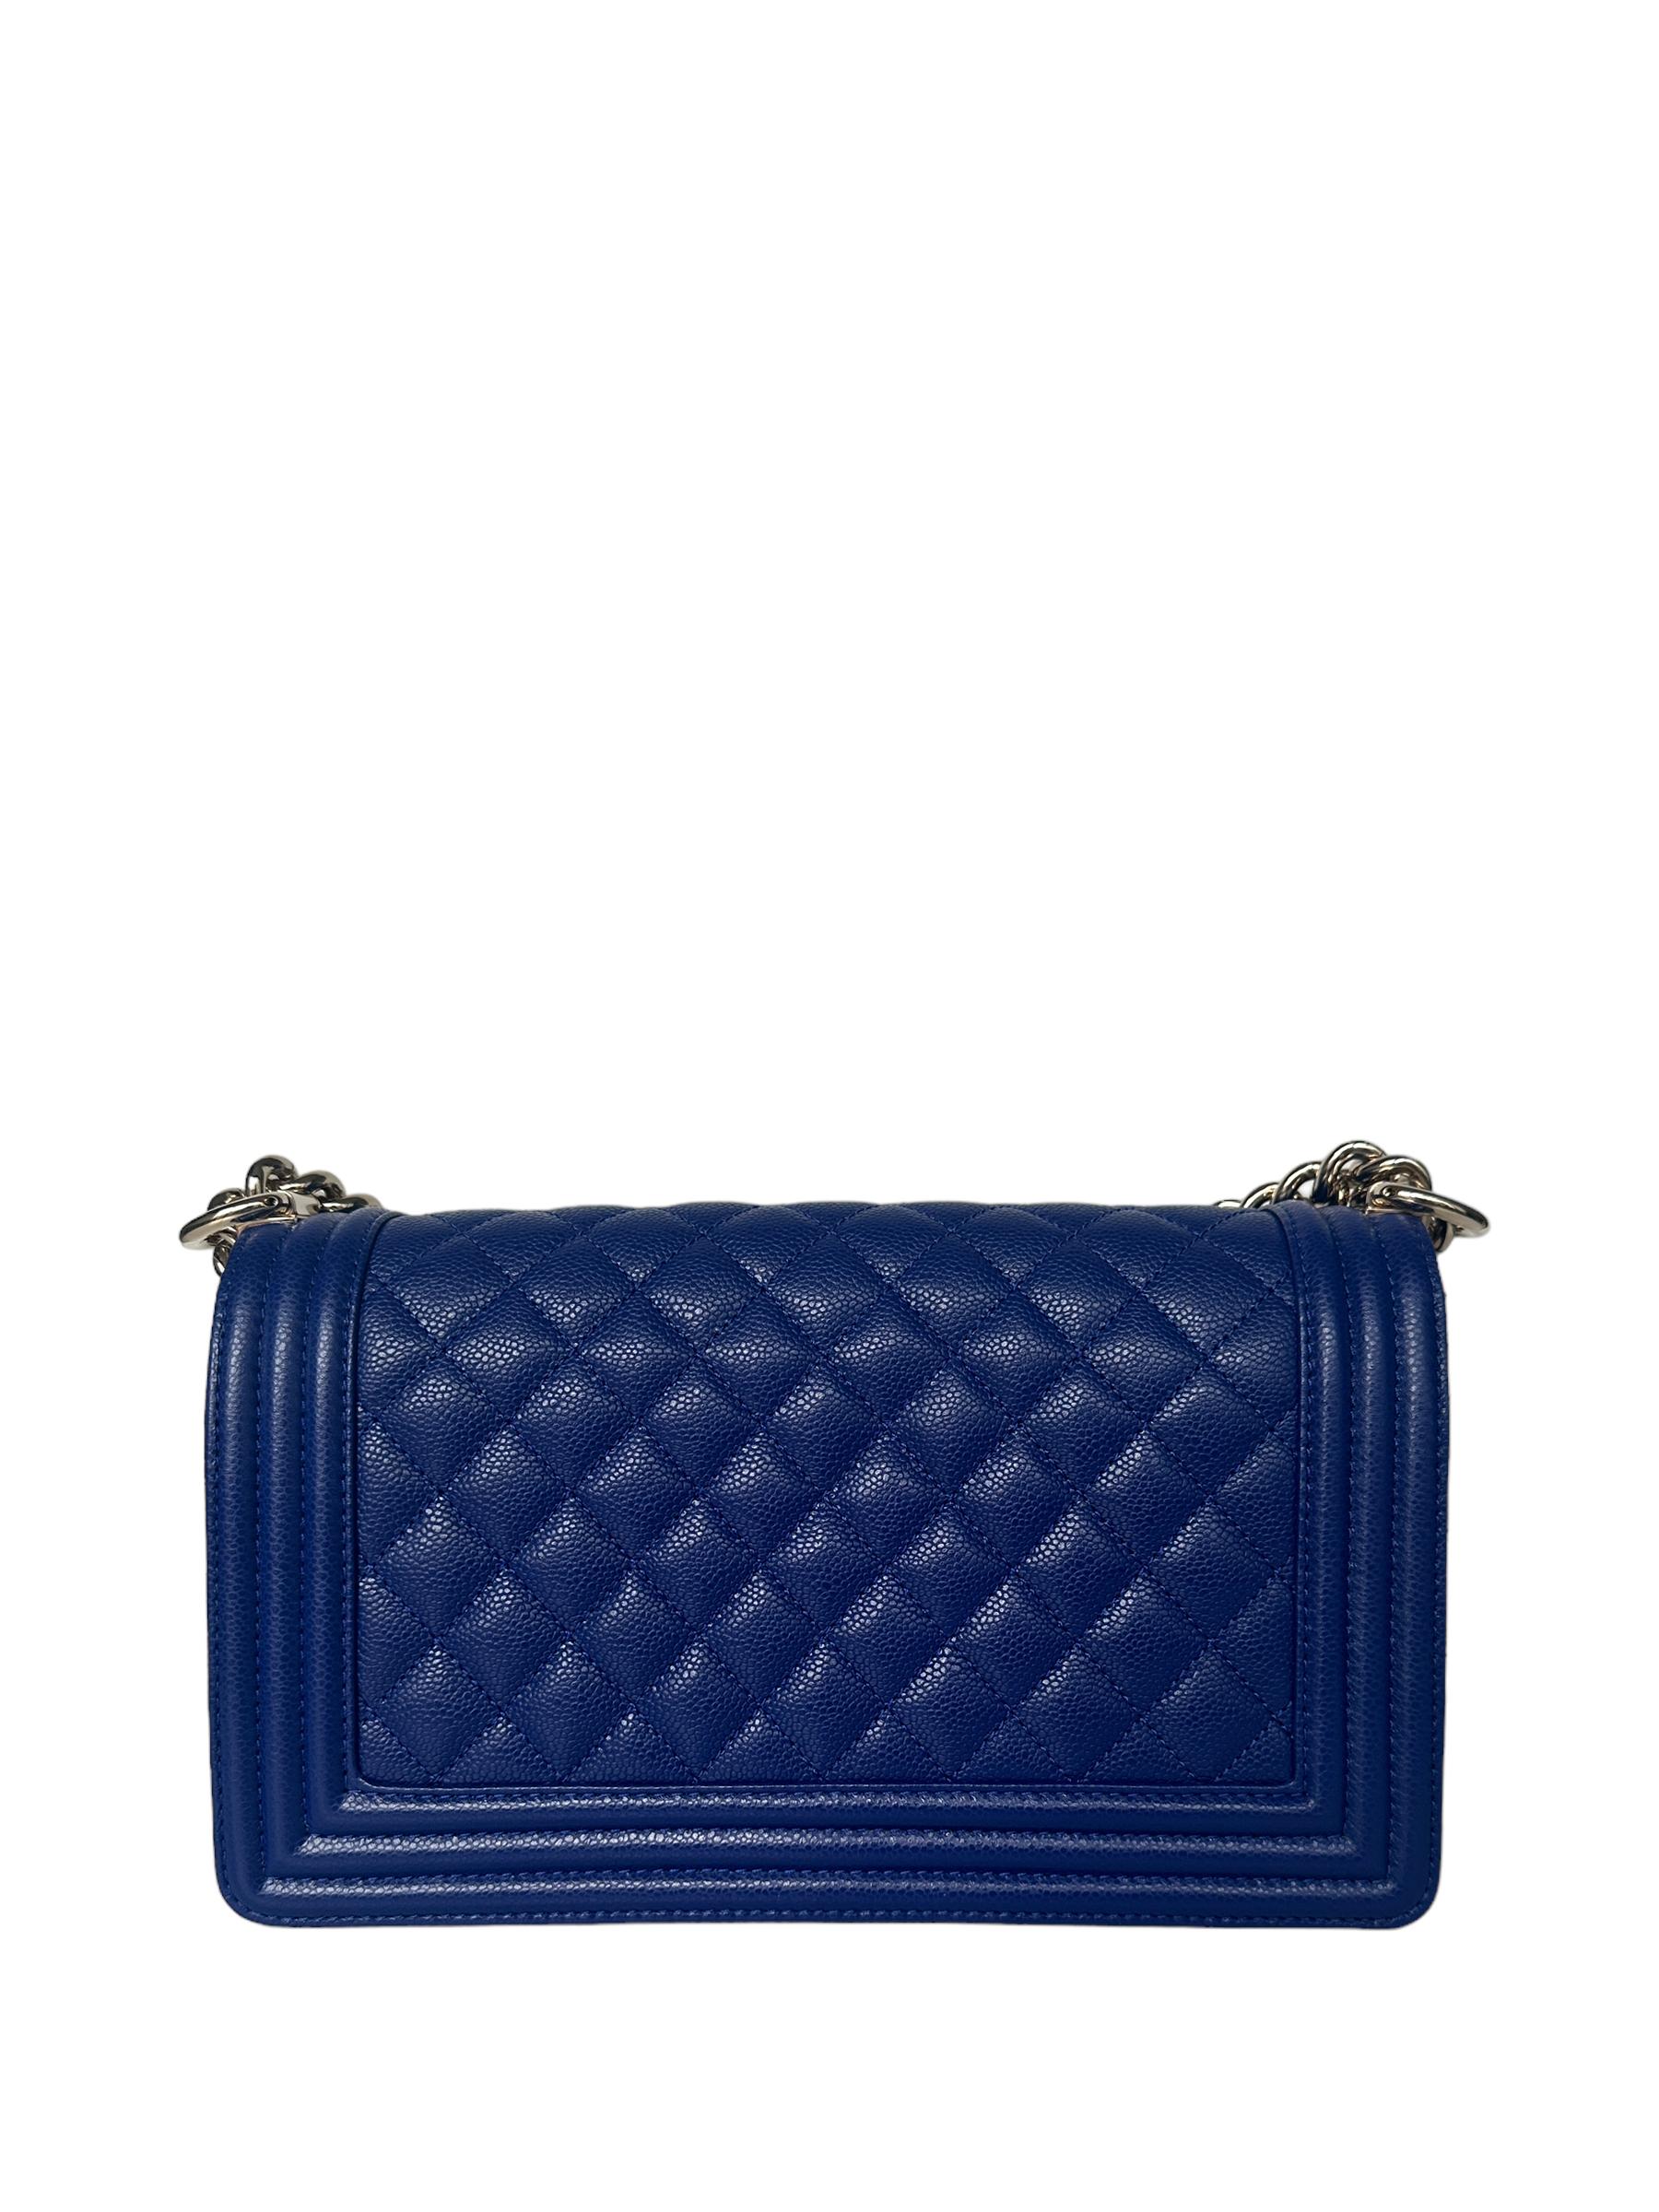 Chanel NEW Cobalt Blue Caviar Leather Quilted Medium Boy Bag   

Made In: Italy
Color: Blue
Hardware: Pale goldtone
Materials: Caviar leather
Lining: Leather
Closure/Opening: Flap top with pushlock
Exterior Pockets: None
Interior Pockets: One wall